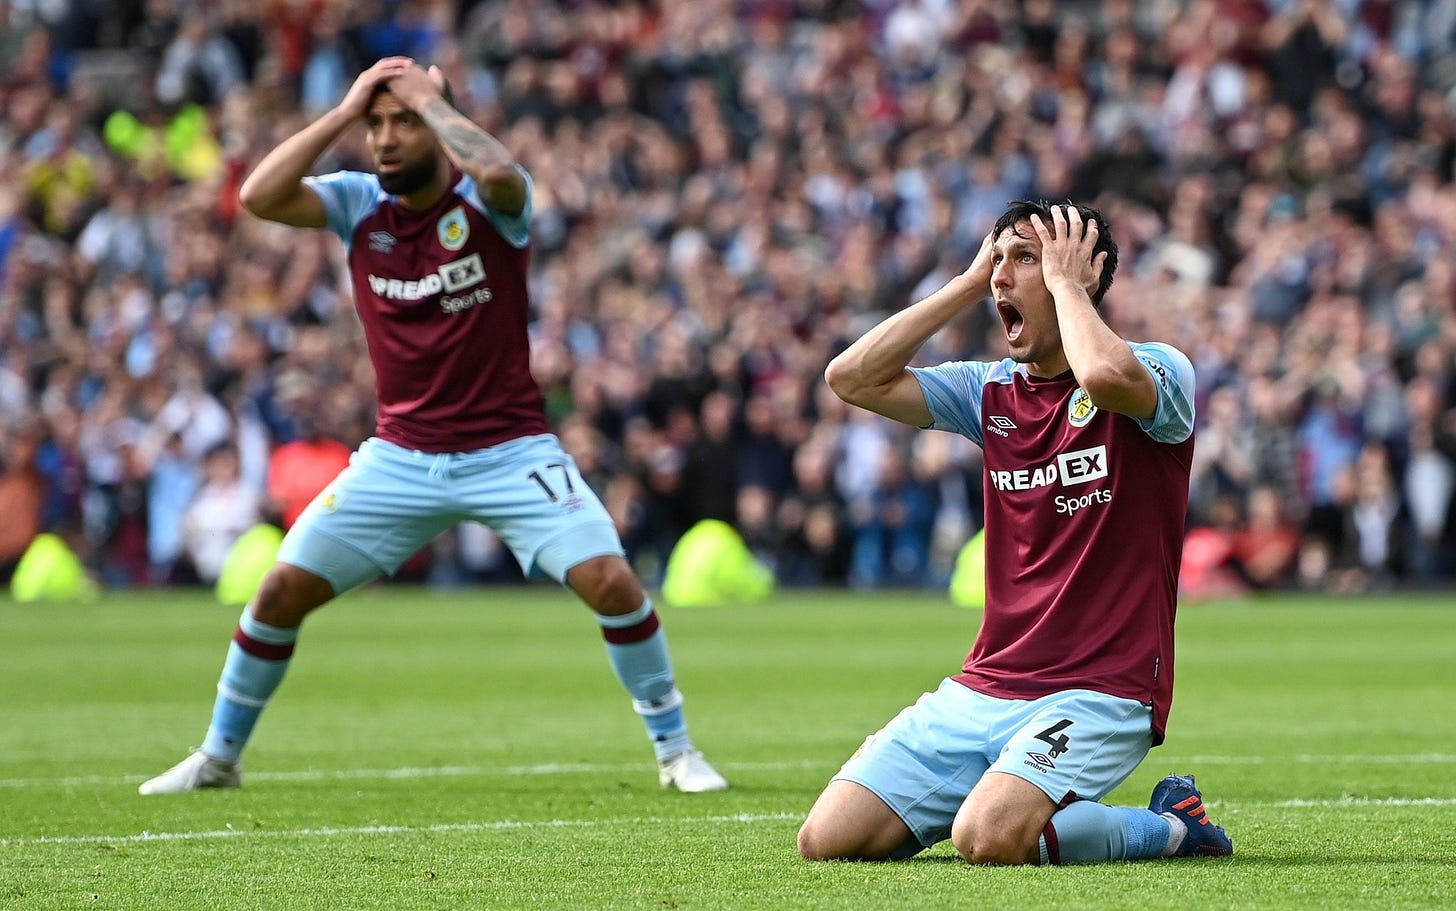 We've not been good enough': Burnley relegated after defeat to Newcastle